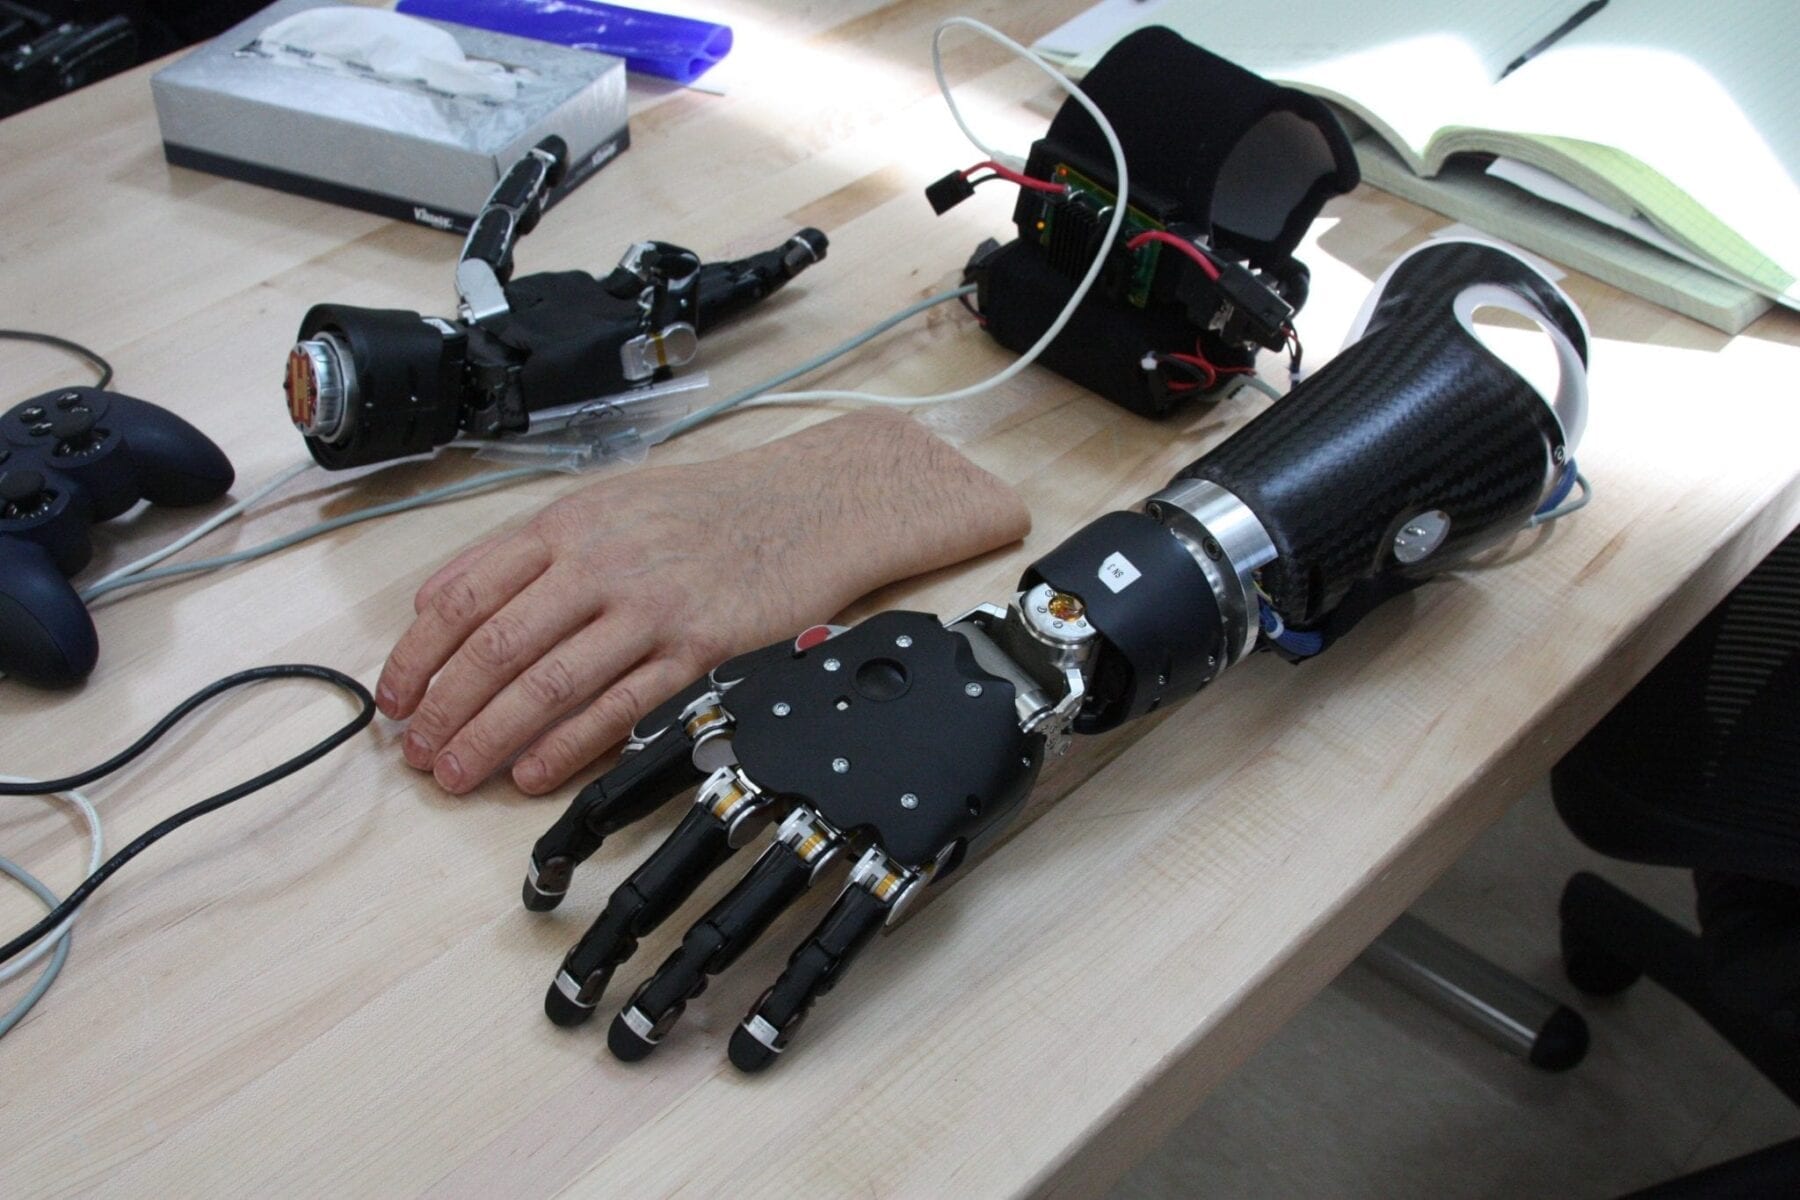 Prosthetic Hands with a Sense of Touch? Breakthroughs in Providing 'Sensory Feedback' from Artificial Limbs